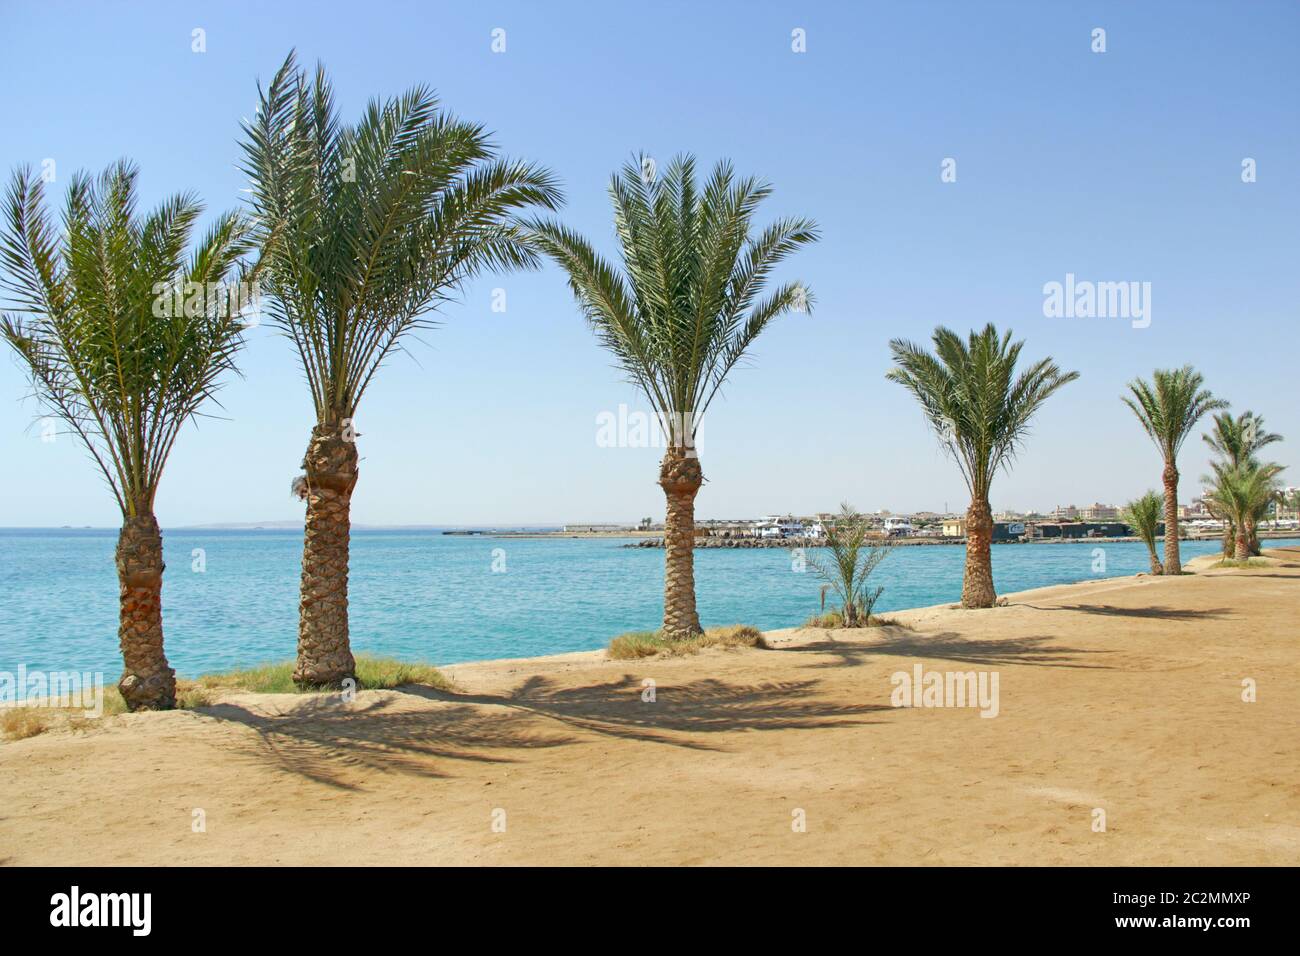 Date palms on beach. Row of date palms grow on sea shore. Tropical resort in Egypt. Coast of Red Sea Stock Photo